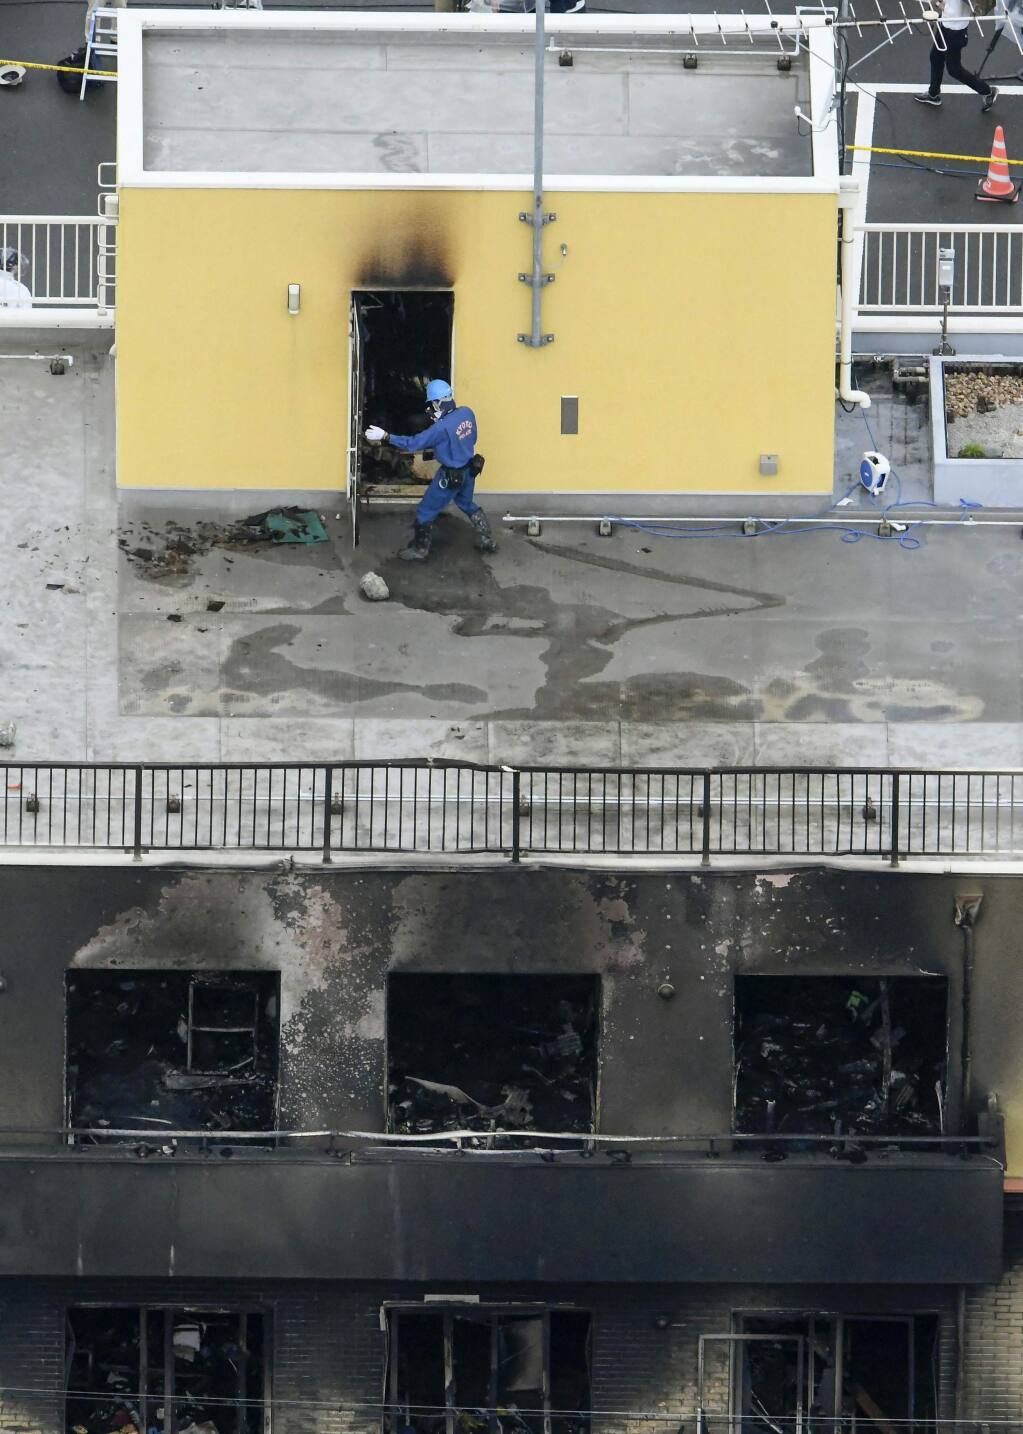 Man sets Kyoto anime studio on fire while screaming 'you die